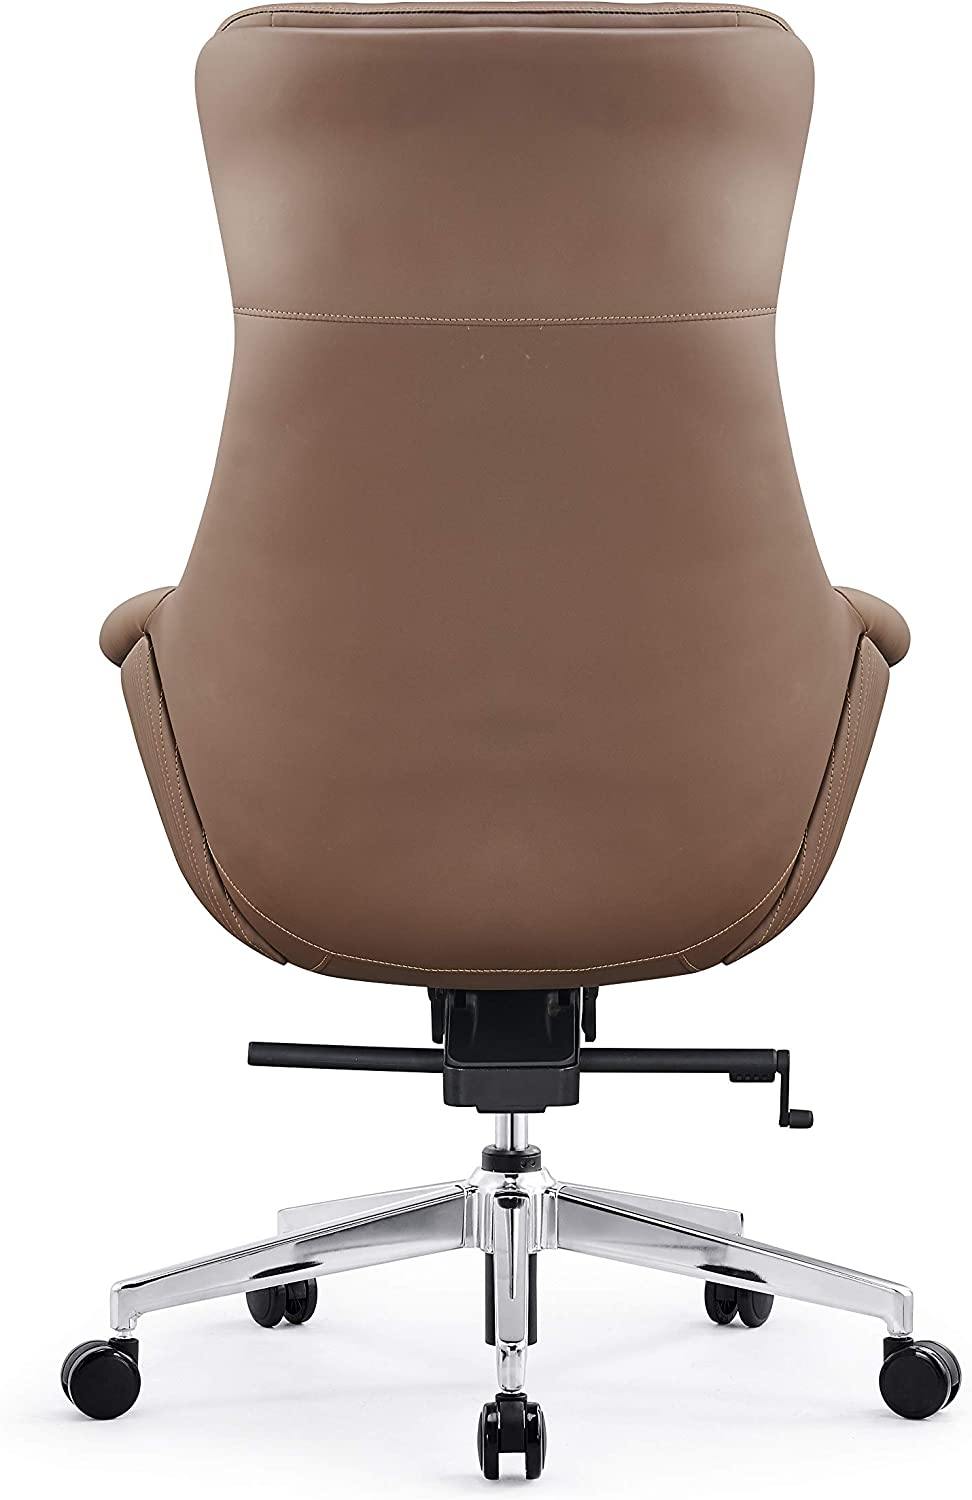 High Back Swivel Chair for Desk with Adjustable Height Handle Office Armchair PU Leather Ergonomic Desk Chair, Brown - Bosonshop